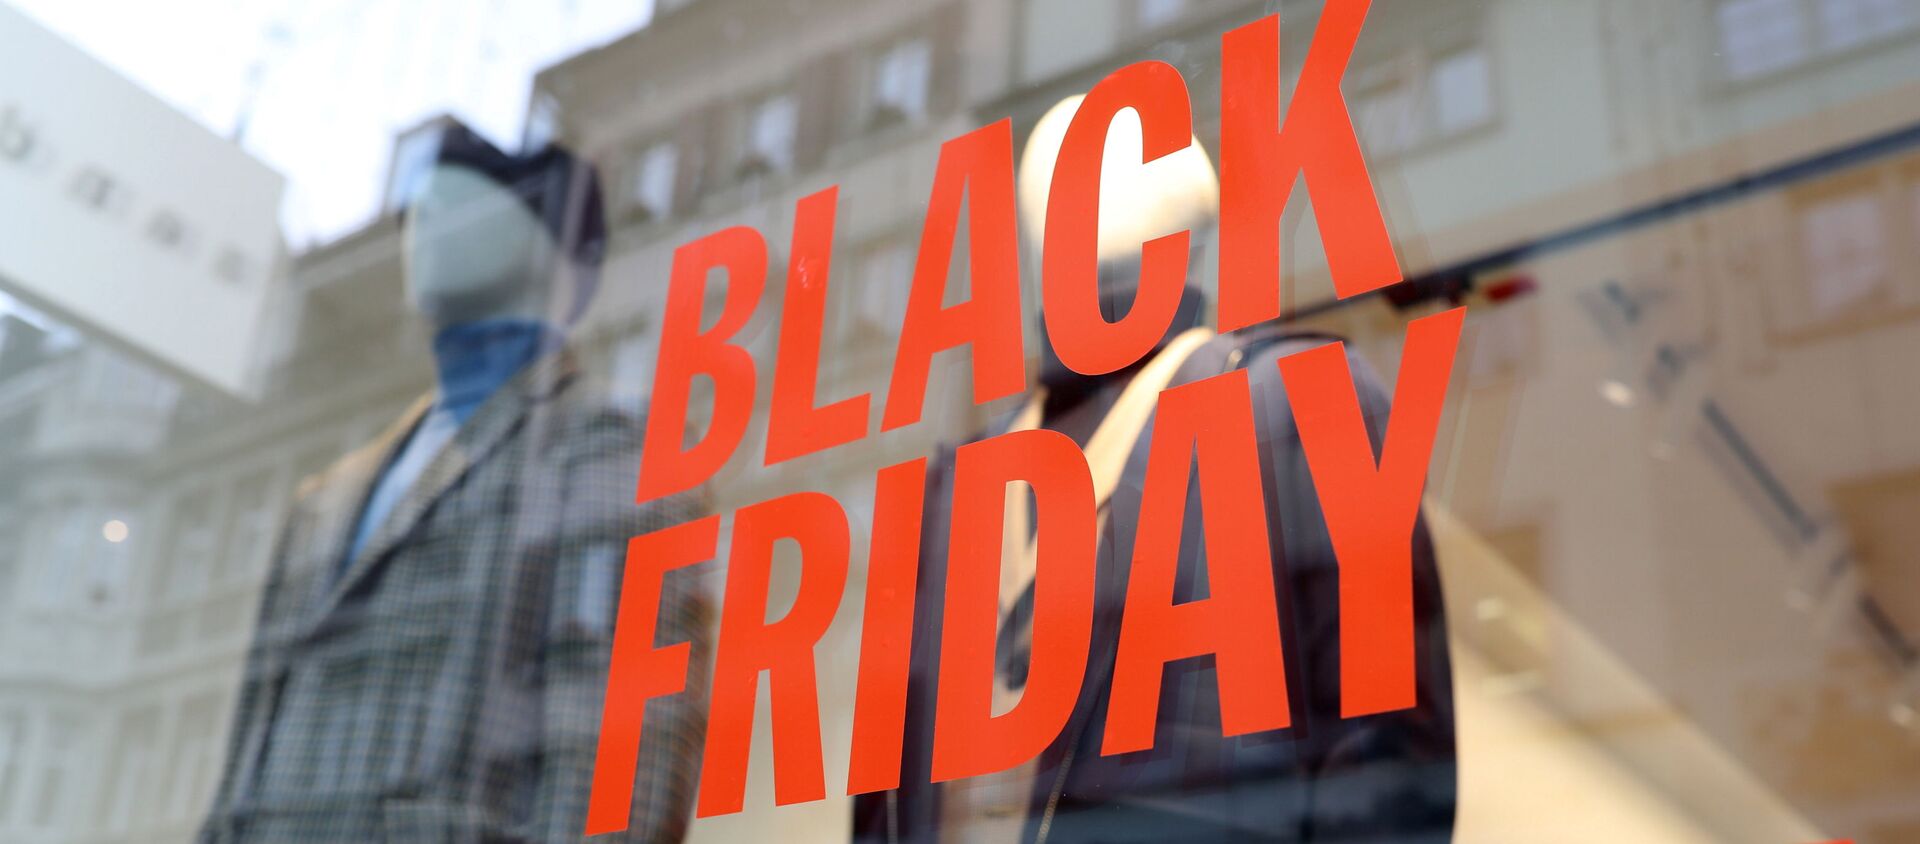 Special discount on Black Friday sales is offered at a fashion store, as the spread of the coronavirus disease (COVID-19) continues, in Zurich, Switzerland November 27, 2020.  REUTERS/Arnd Wiegmann - Sputnik International, 1920, 27.11.2020